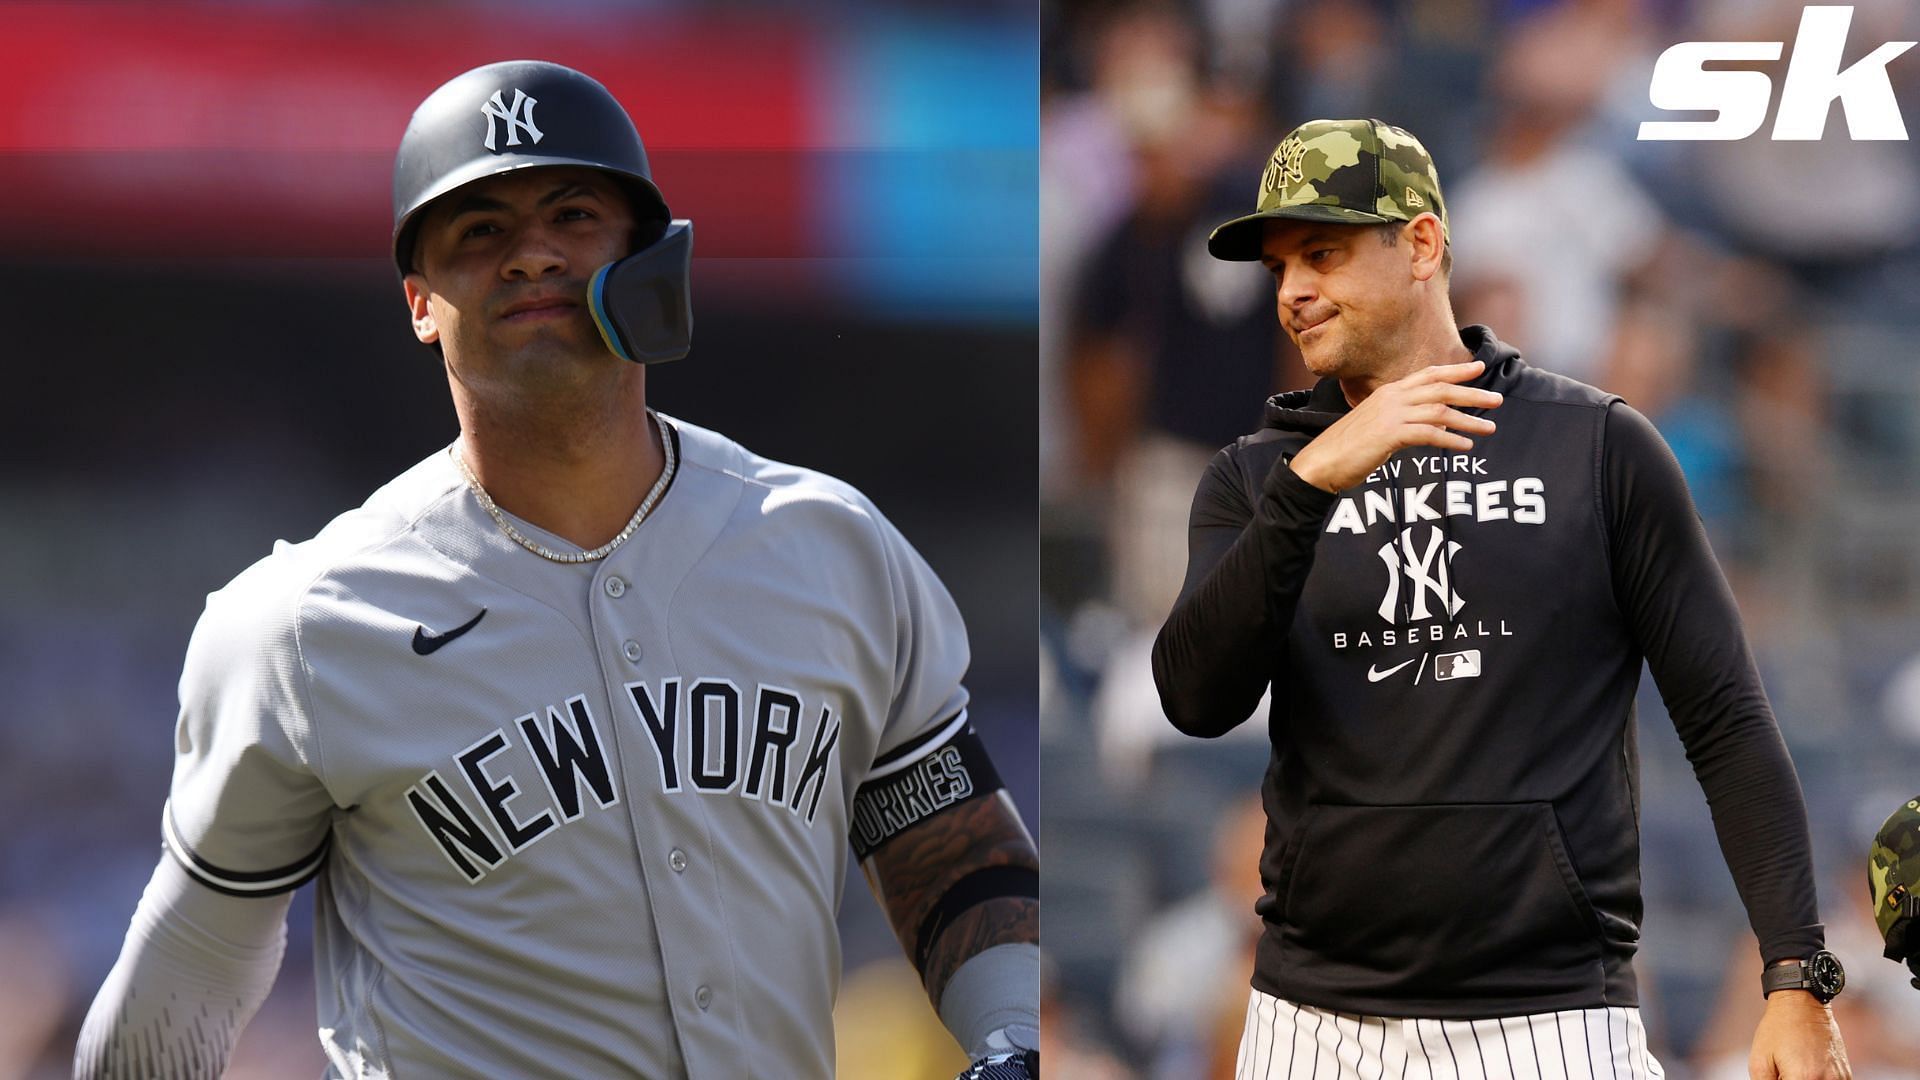 Yankees' Gleyber Torres will be scarier once he masters the